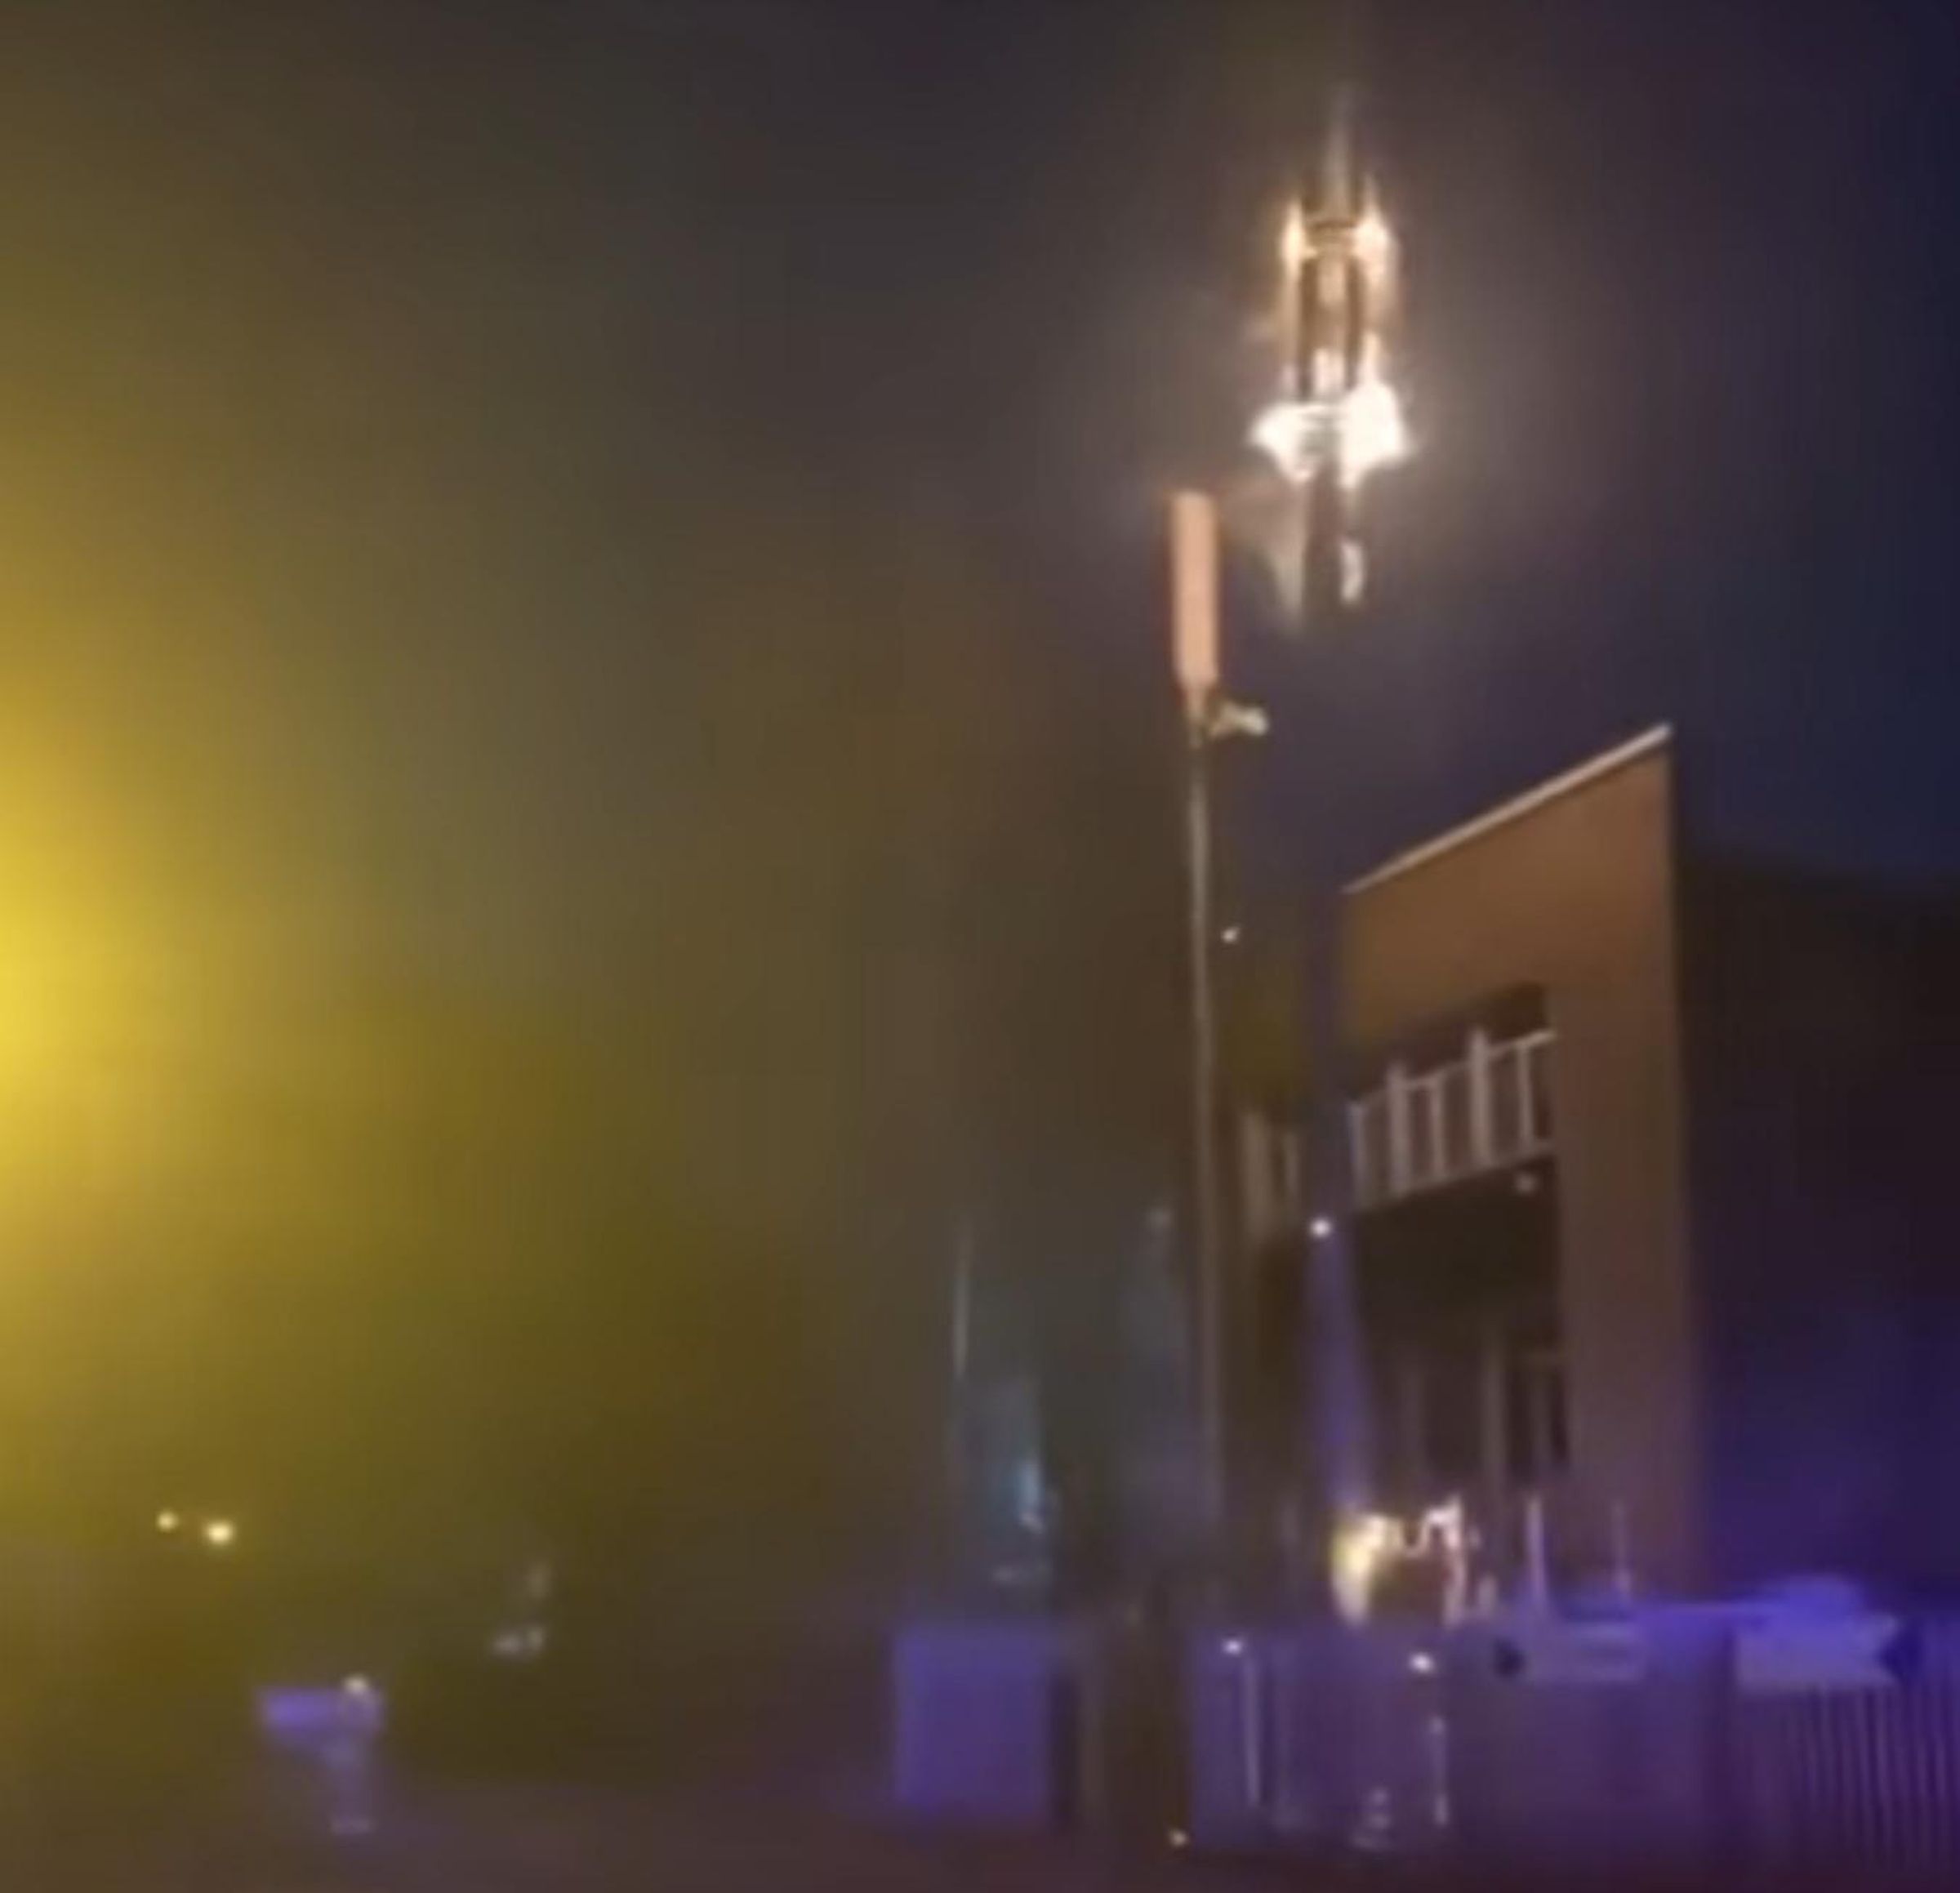 Videos have been shared on Facebook of 5G towers burning.